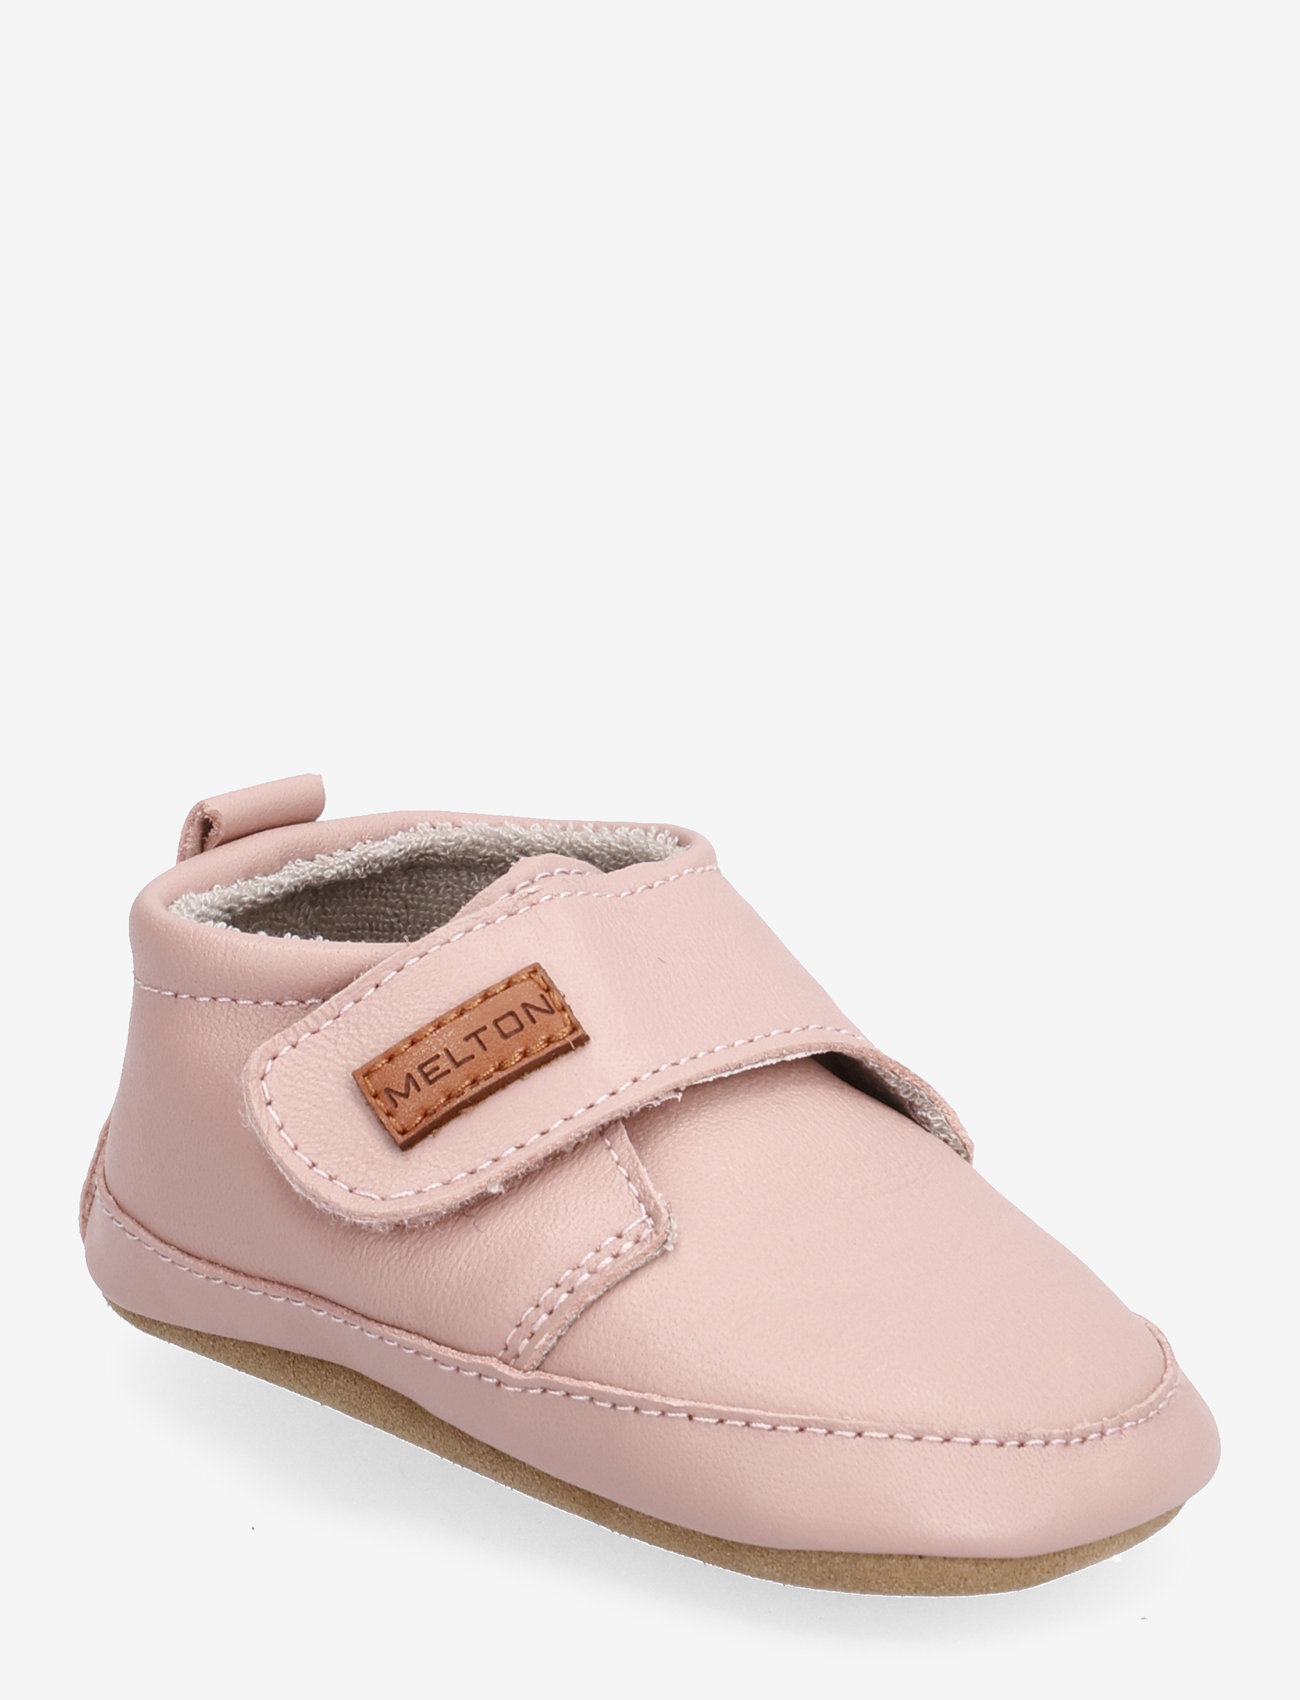 Melton - Classic leather slippers - lowest prices - alt rosa - 0